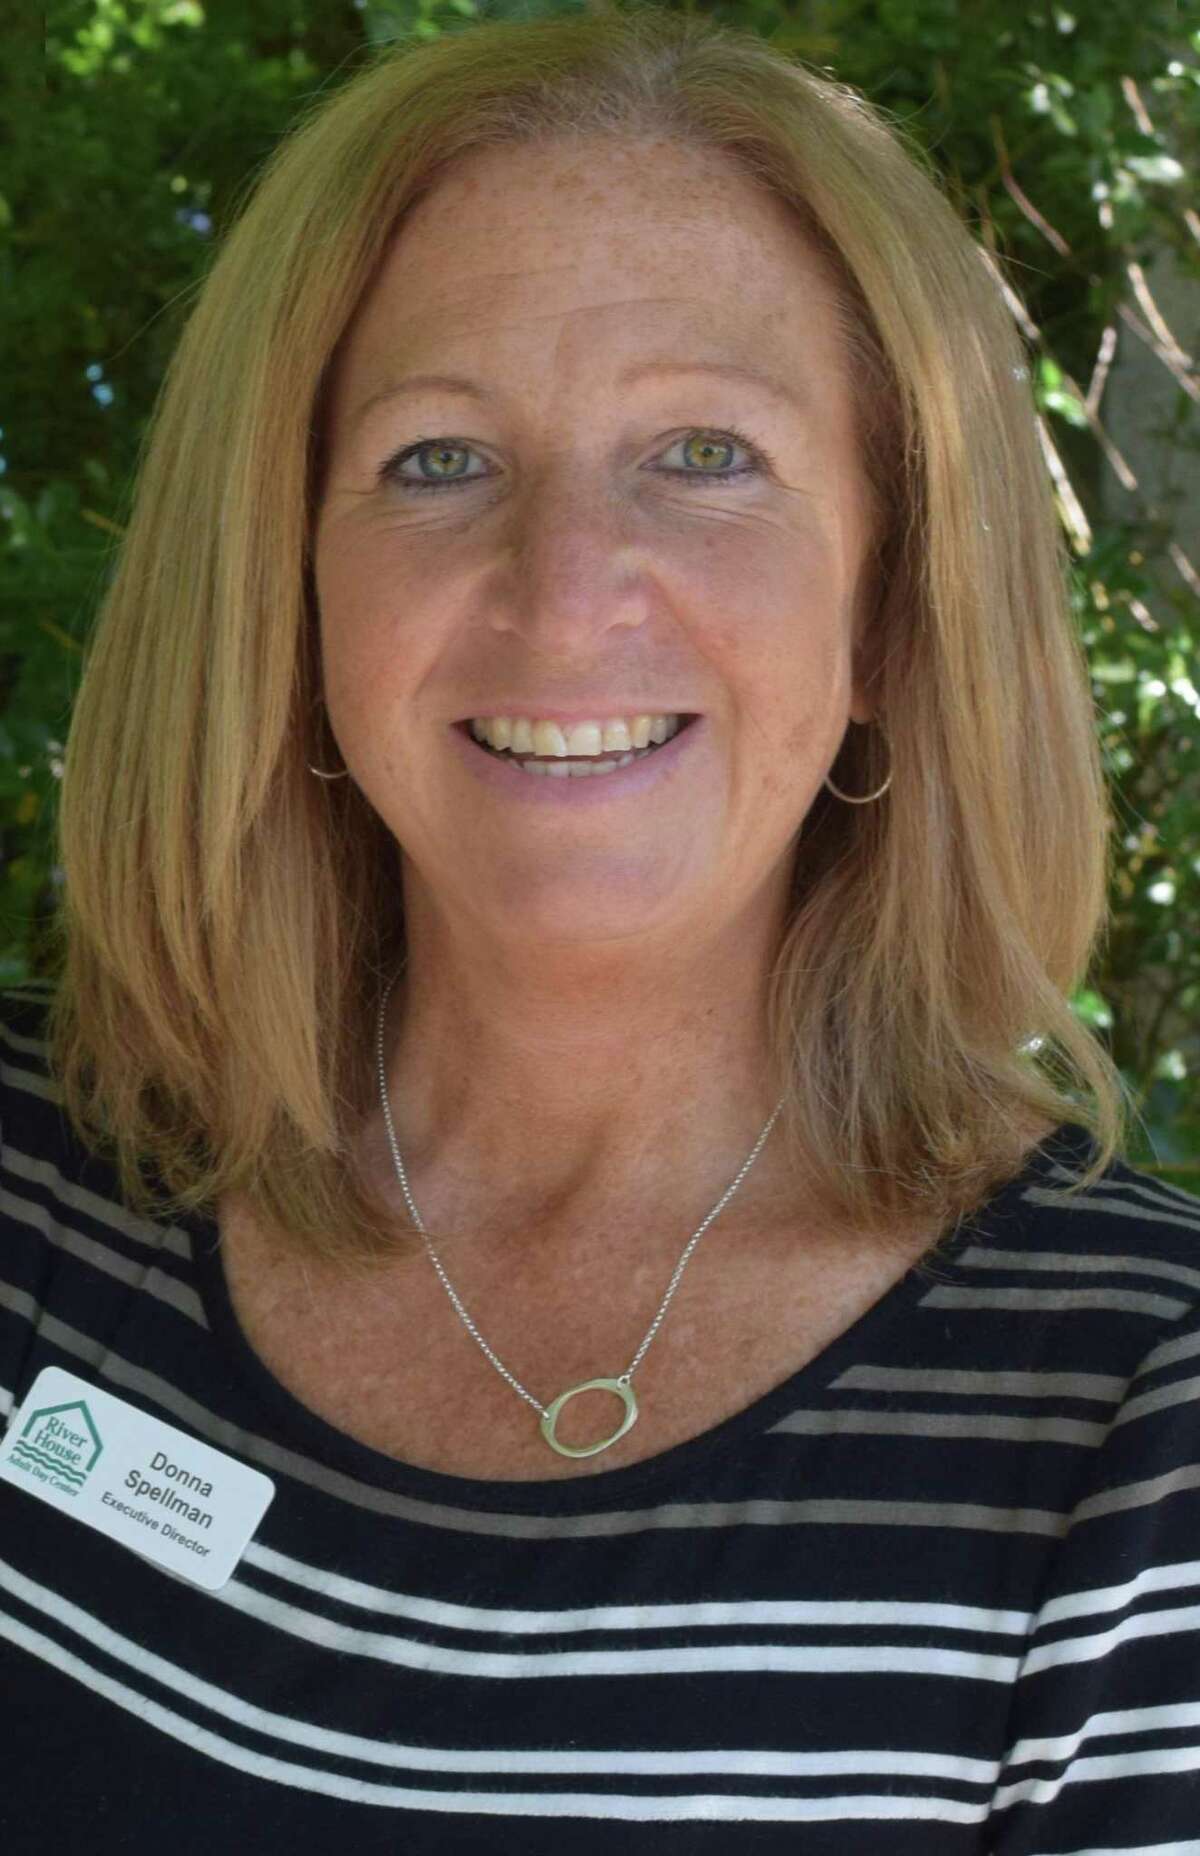 Donna Spellman, executive director of River House Adult Day Center in Greenwich, will be honored at the Stamford Senior Center’s annual “Lives Blossom” fundraising event next month.